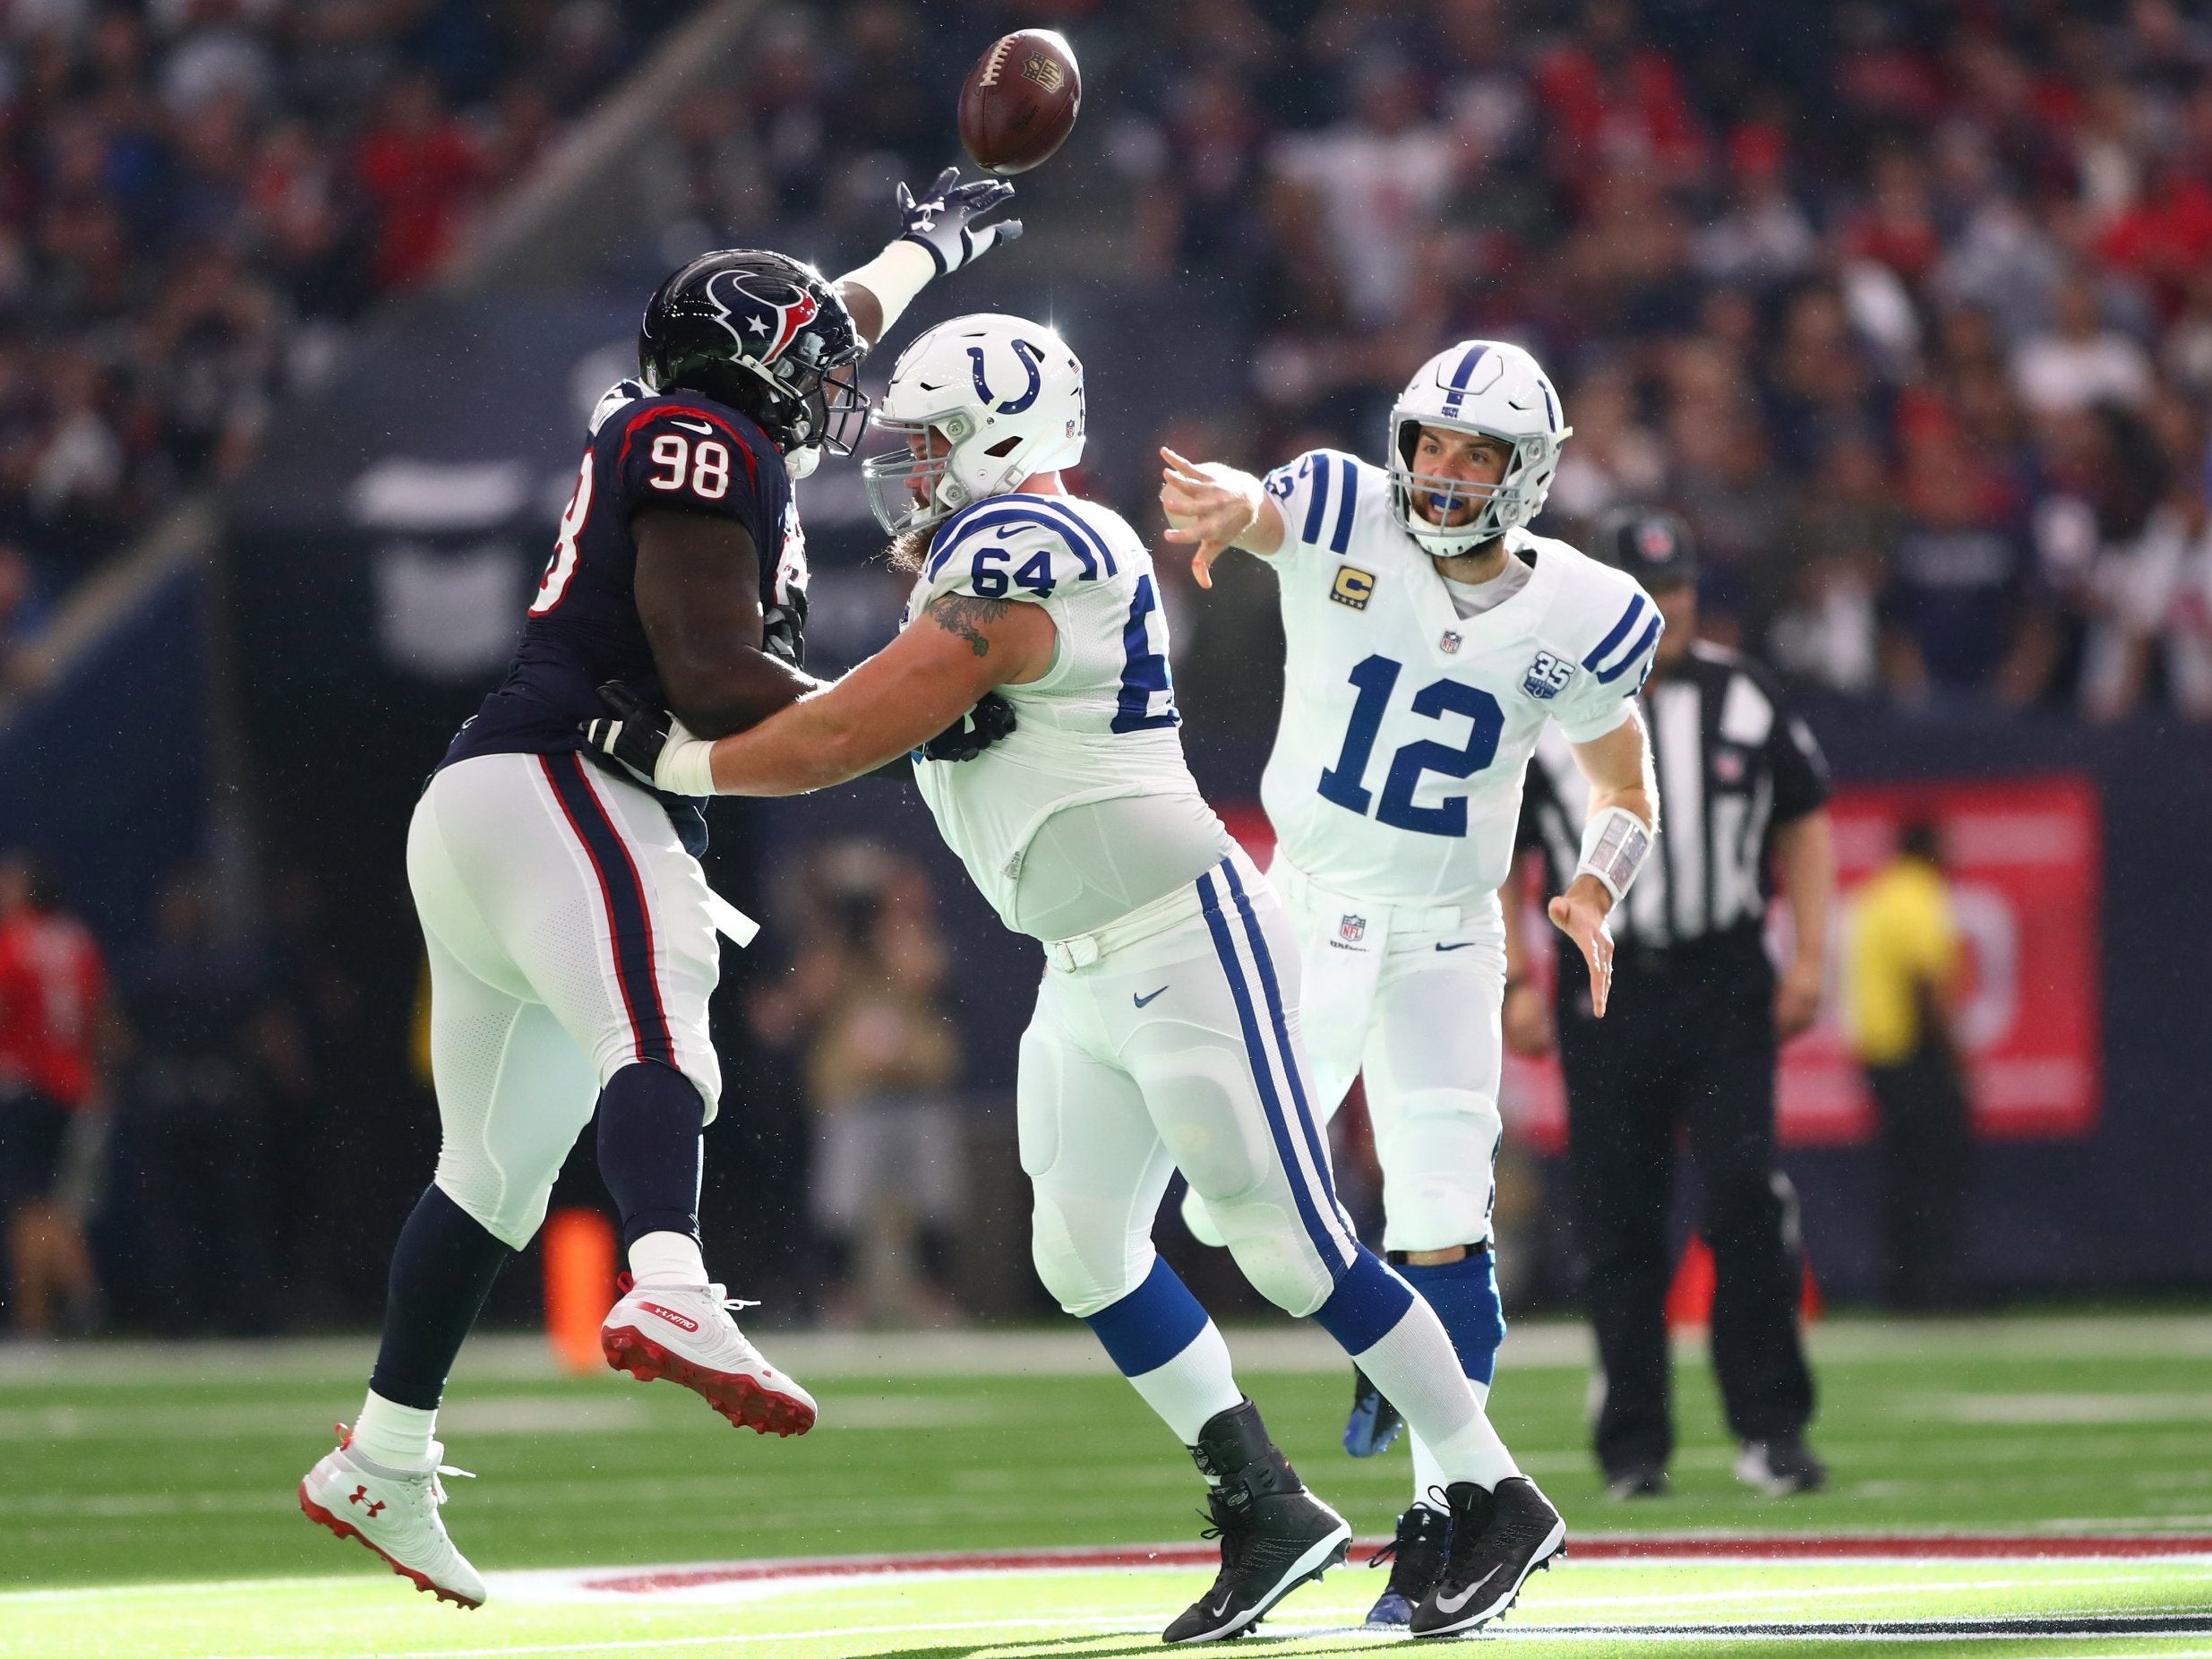 Luck threw for 222 yards and two touchdowns to see the Colts past the Texans